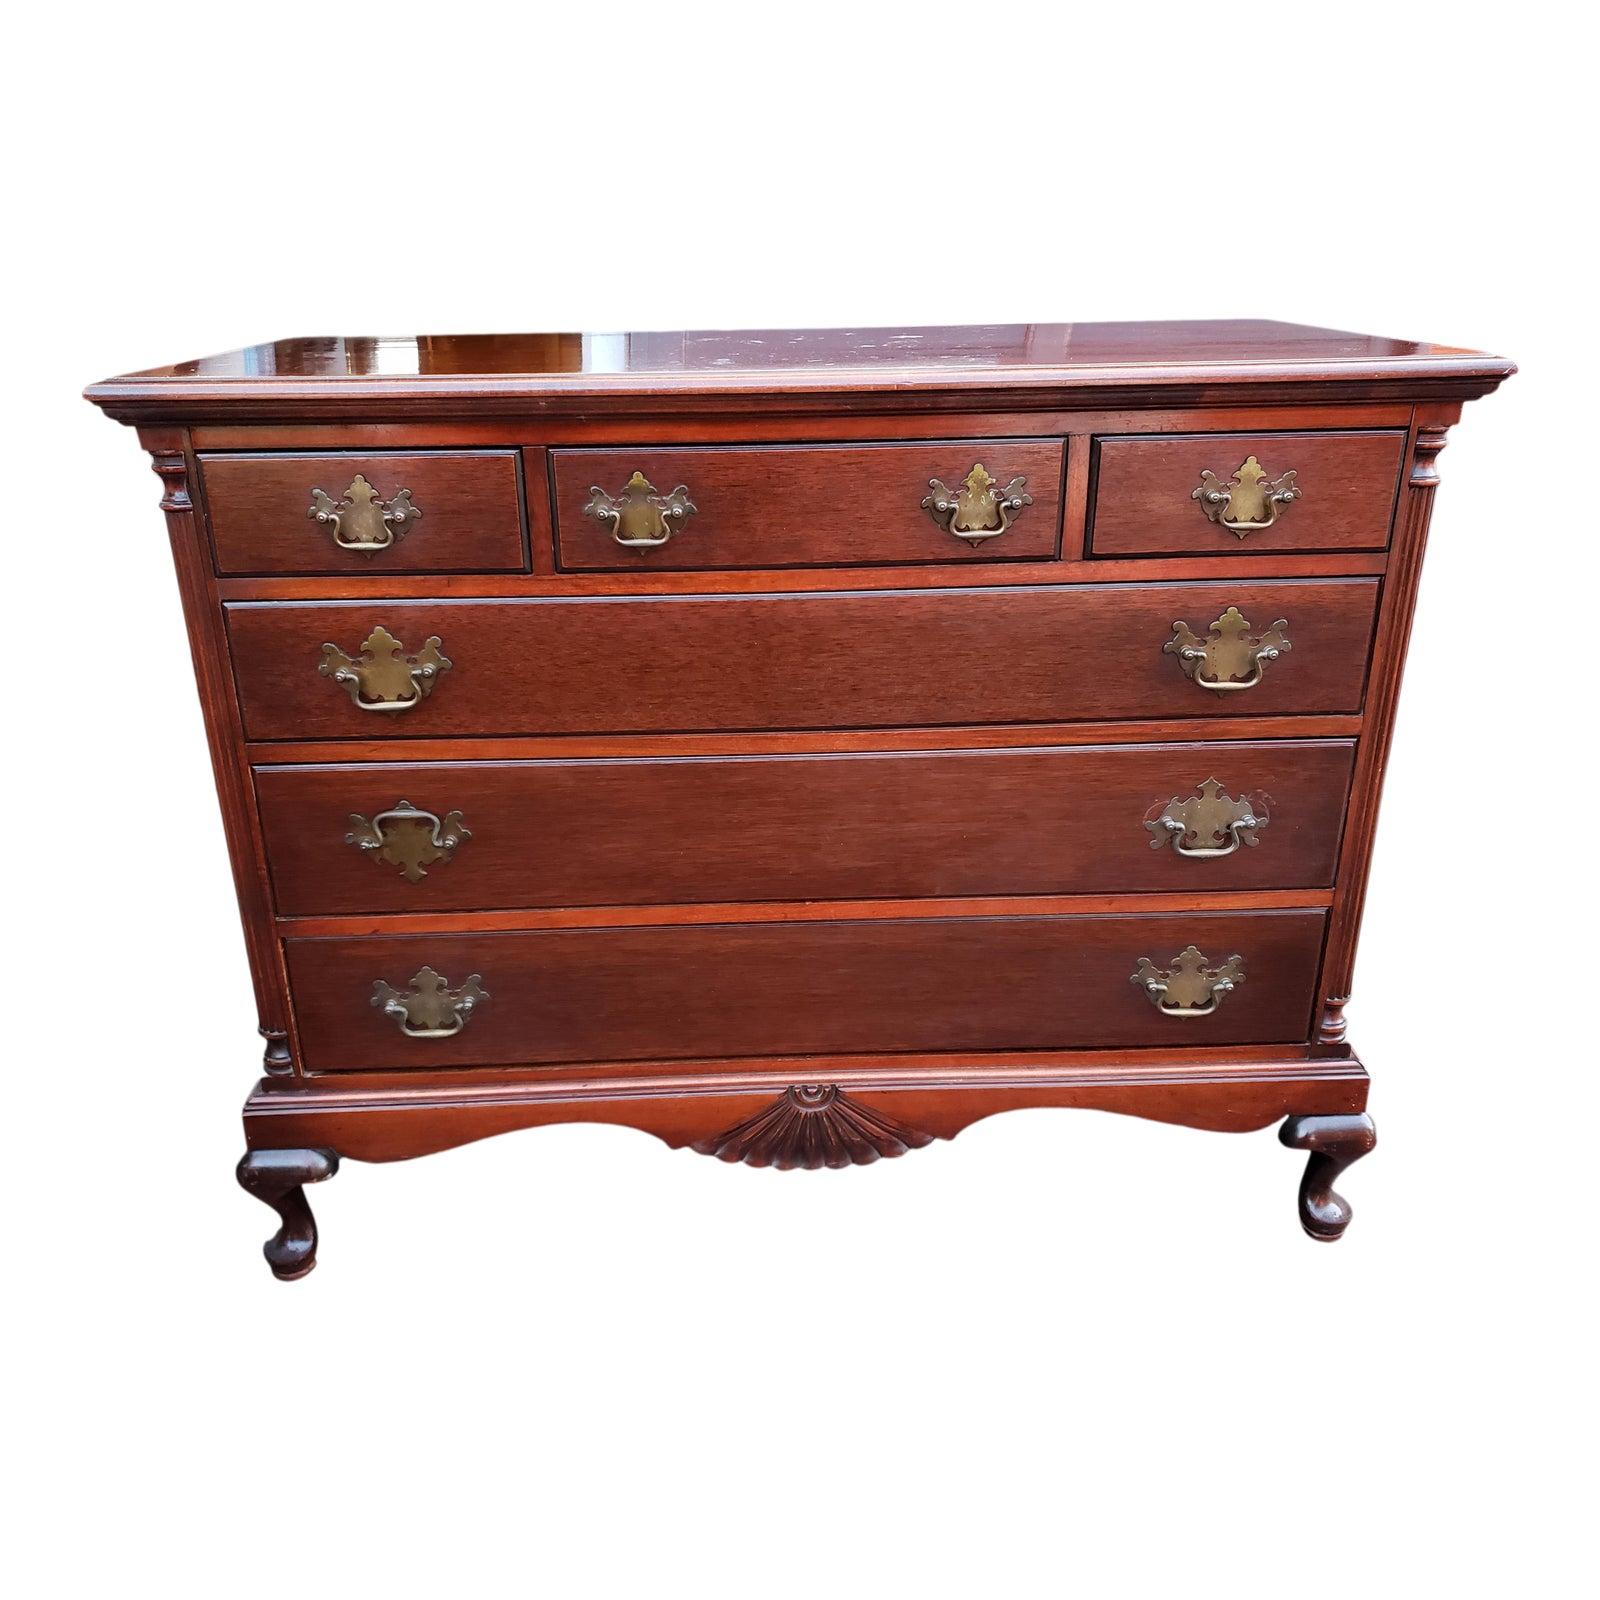 Fantastic classic chest of drawers by Thomasville. 
Absolutely beautiful piece of furniture. 
All functional dovetailed drawers. 
Very sturdy piece out of wild black cherry.
Measures 46